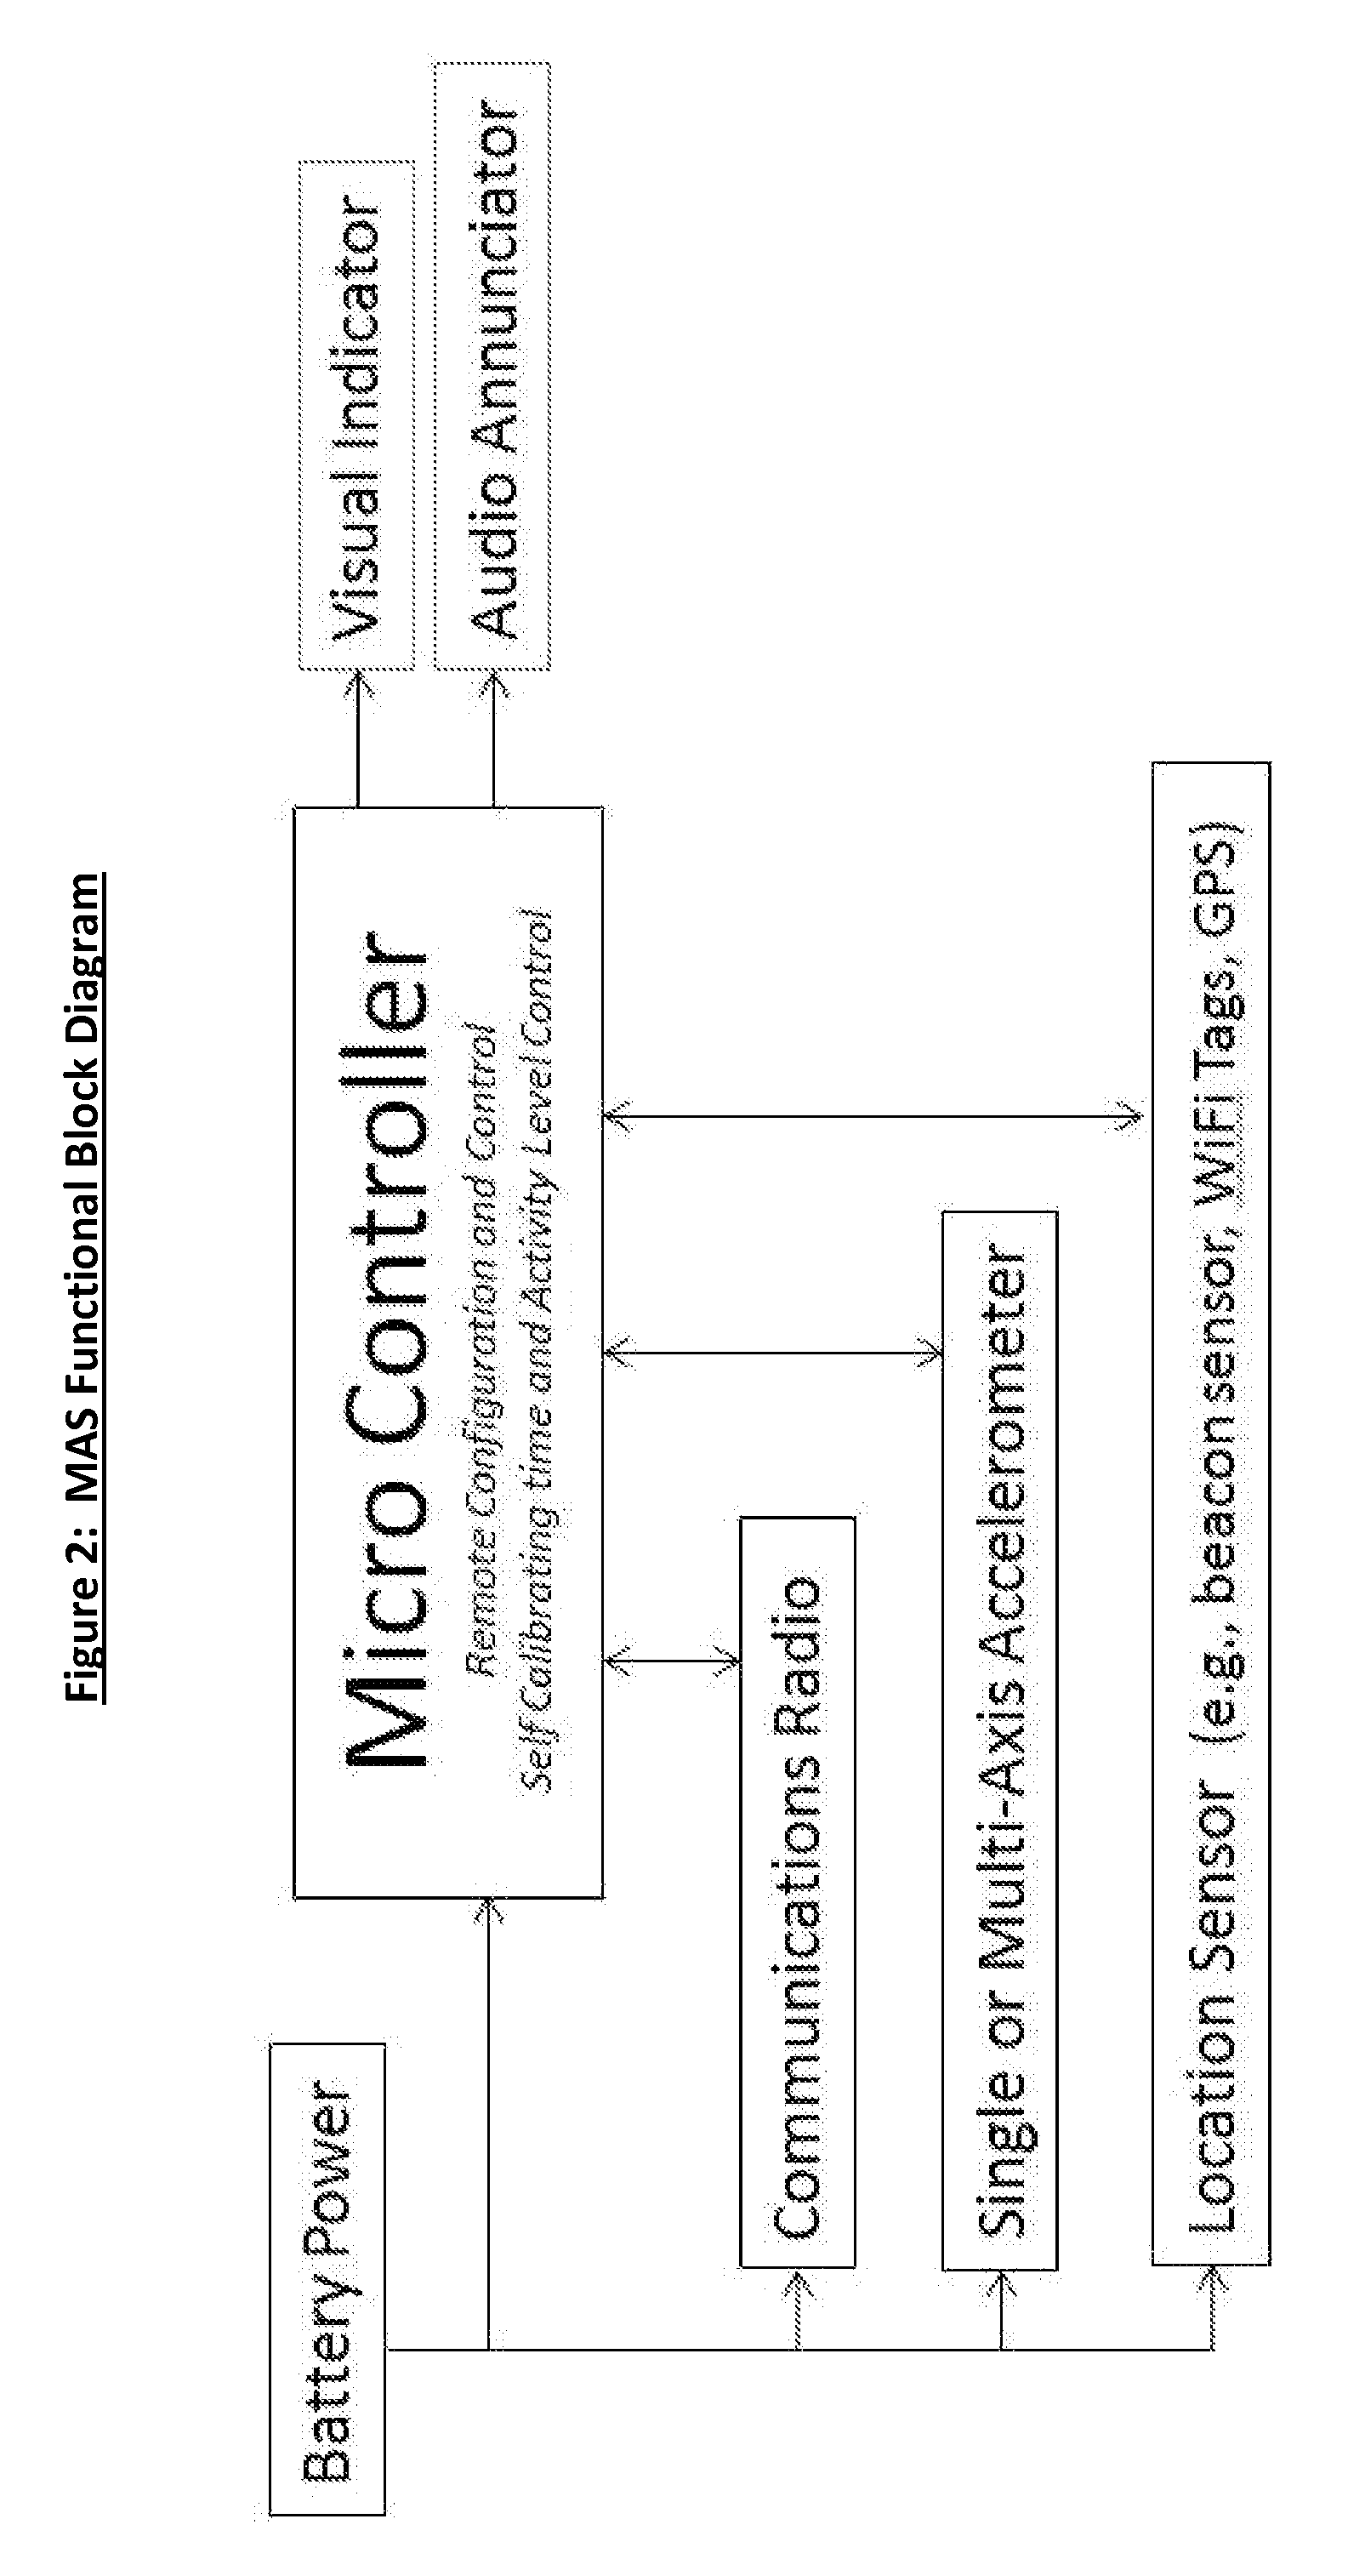 Merchandise Activity Sensor System and Methods of Using Same